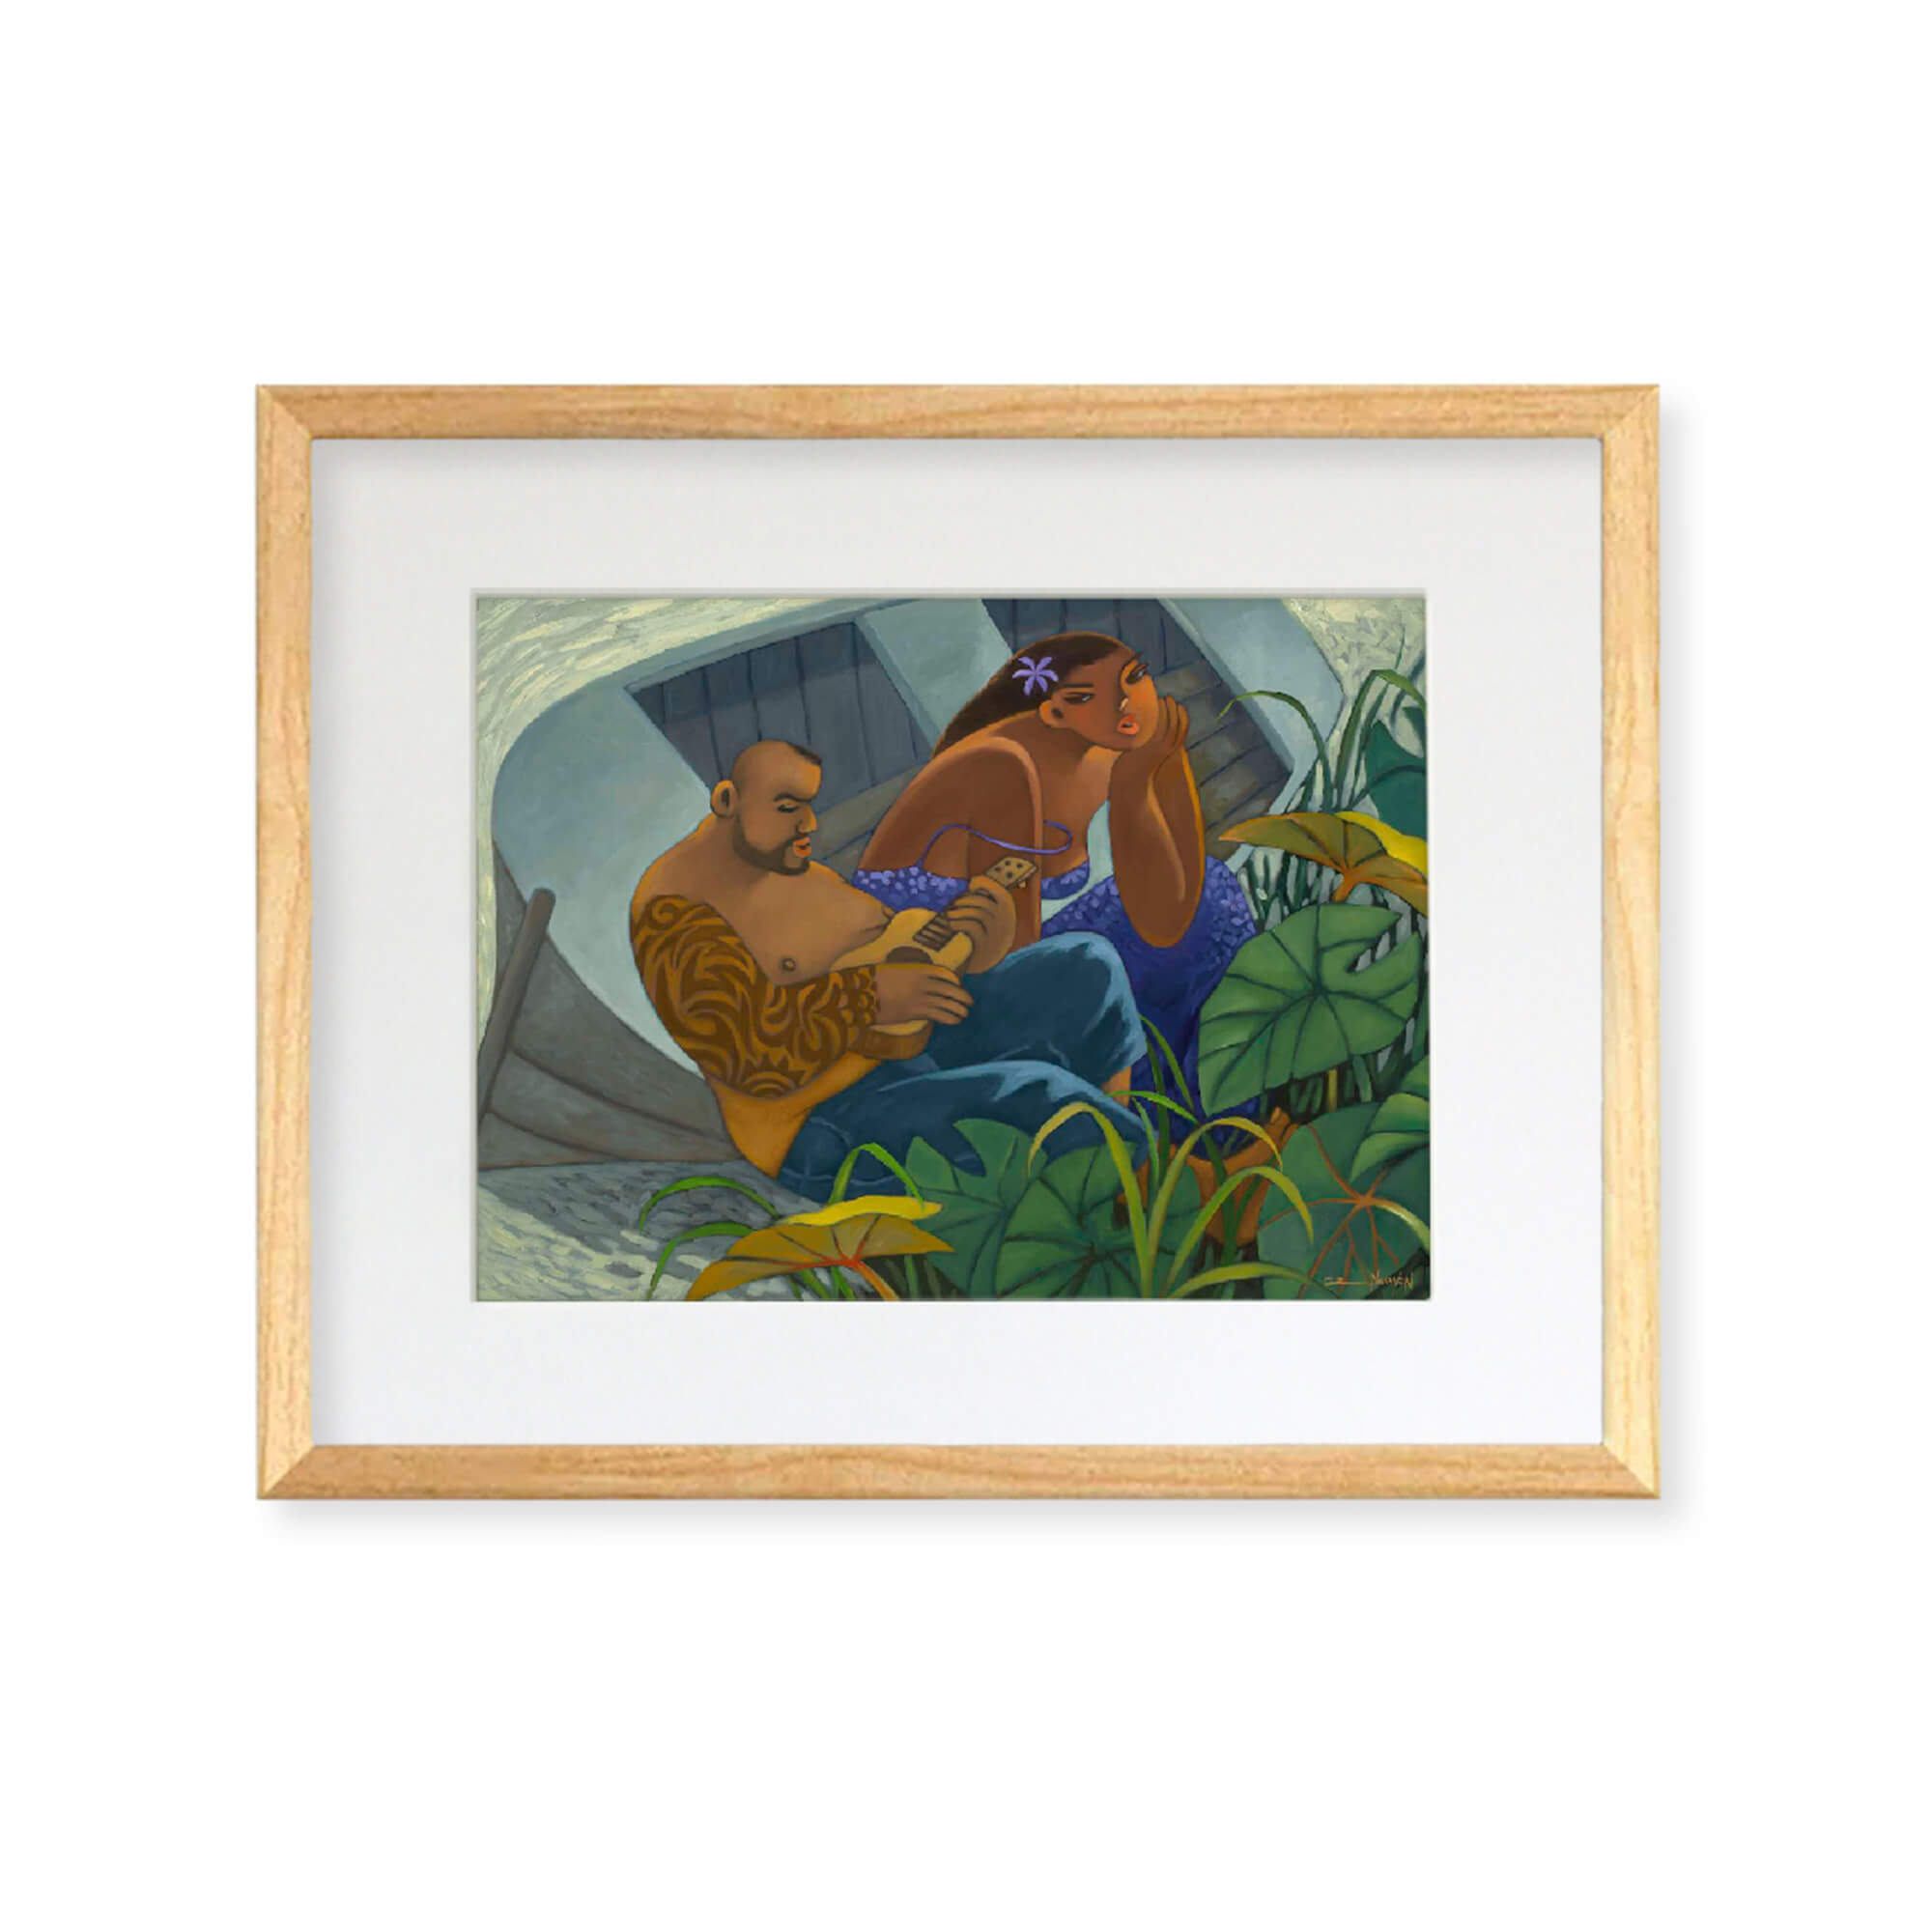 Framed matted art print of a man singing for a woman with a ukulele at the beach by Hawaii artist Tim Nguyen